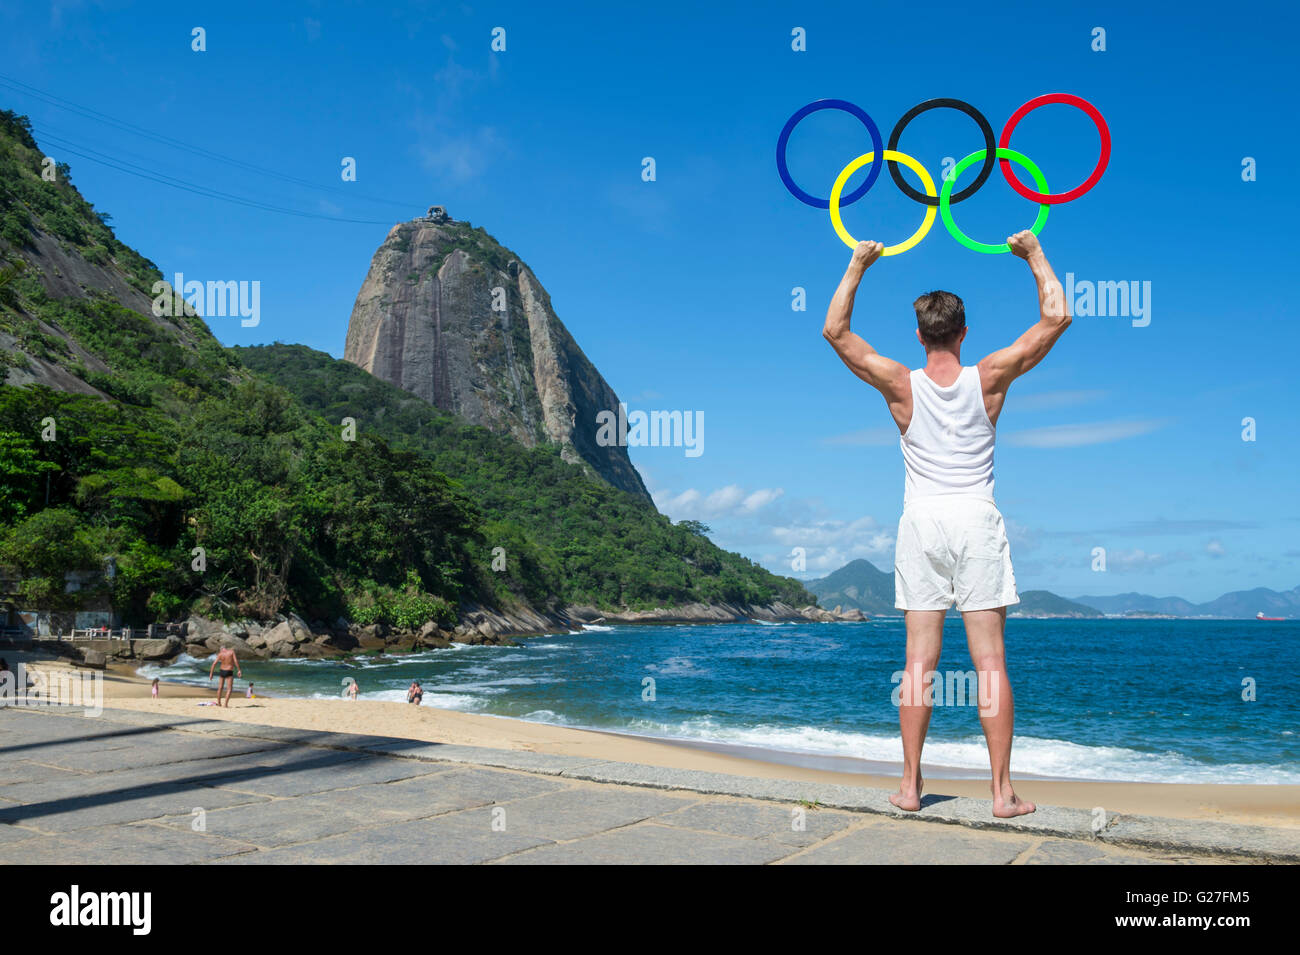 RIO DE JANEIRO - APRIL 2, 2016: Athlete holds Olympic rings in front of a view of Sugarloaf Mountain for the Summer Games. Stock Photo